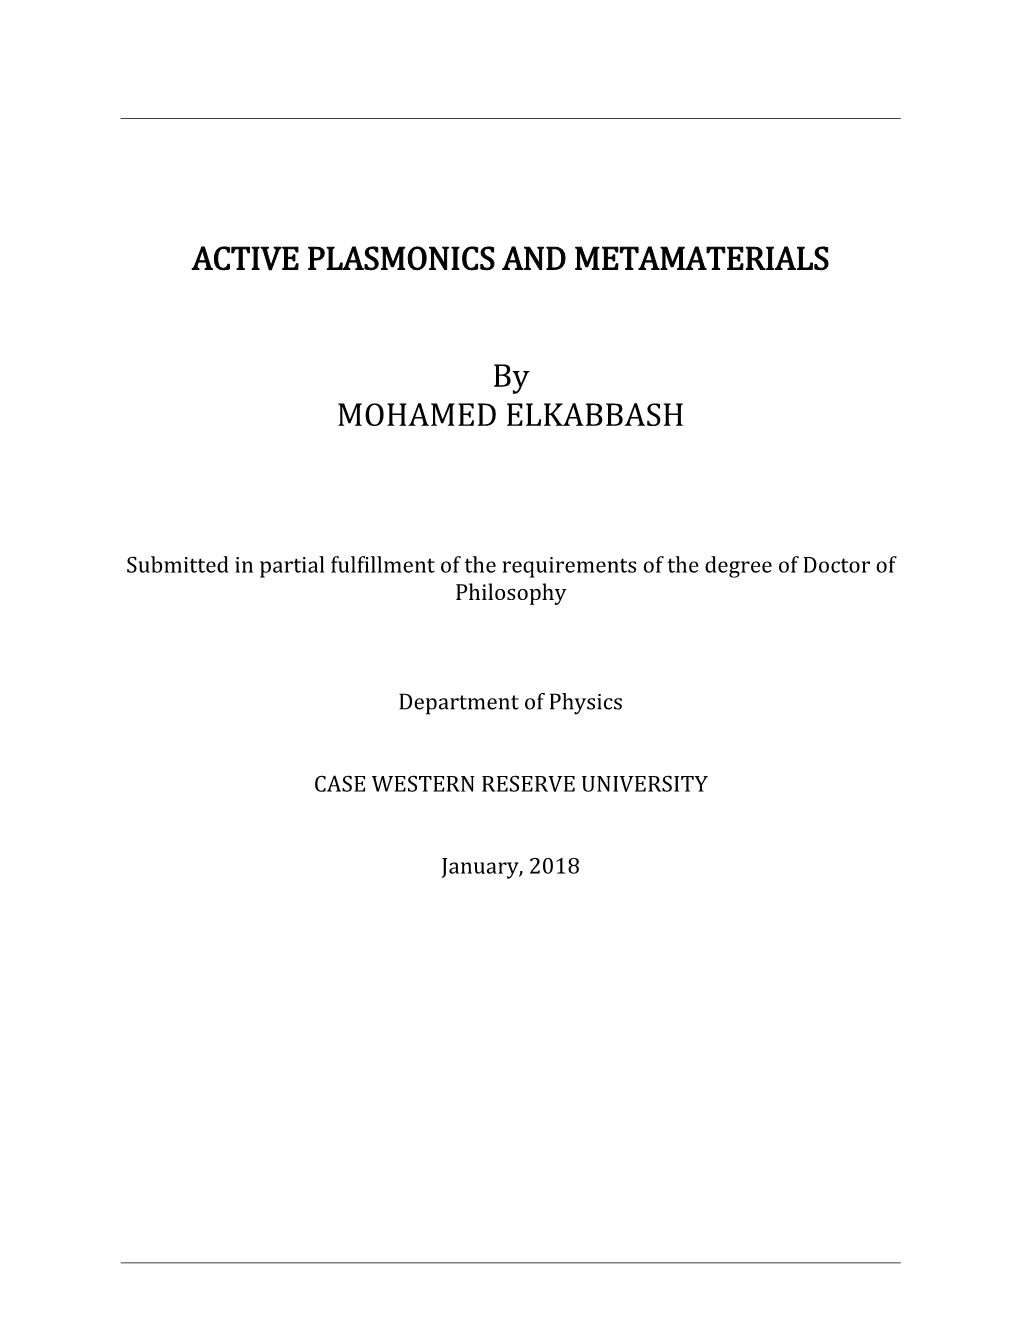 ACTIVE PLASMONICS and METAMATERIALS by MOHAMED